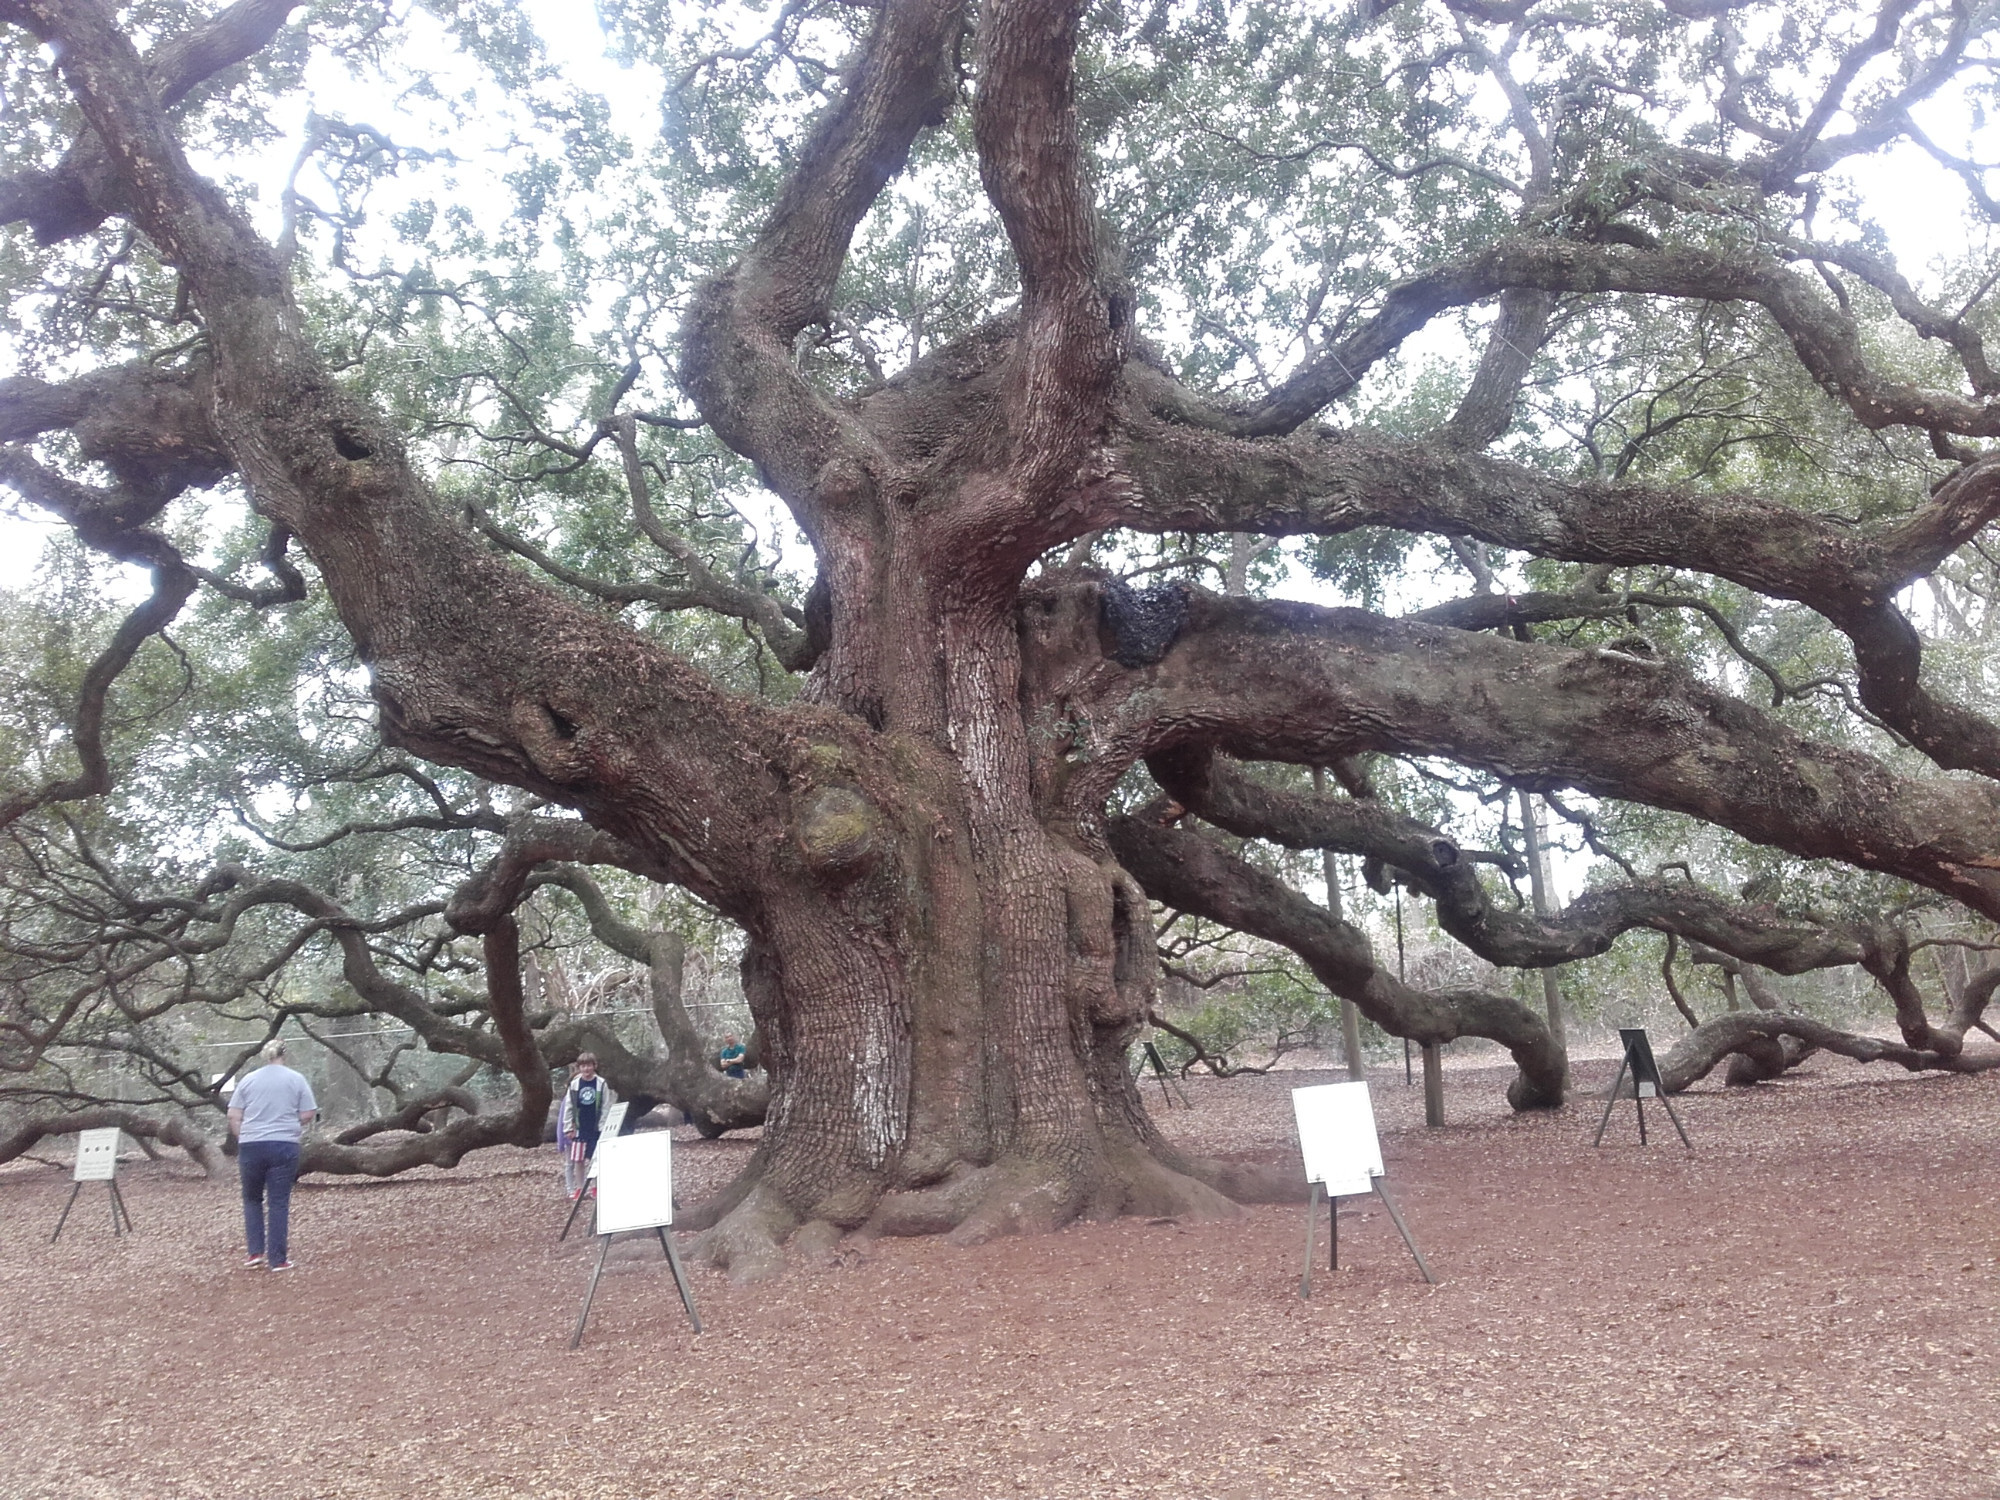 Angel Oak, tree believed to be between 00 & 400 years old.Desgnated an historical site within a city park